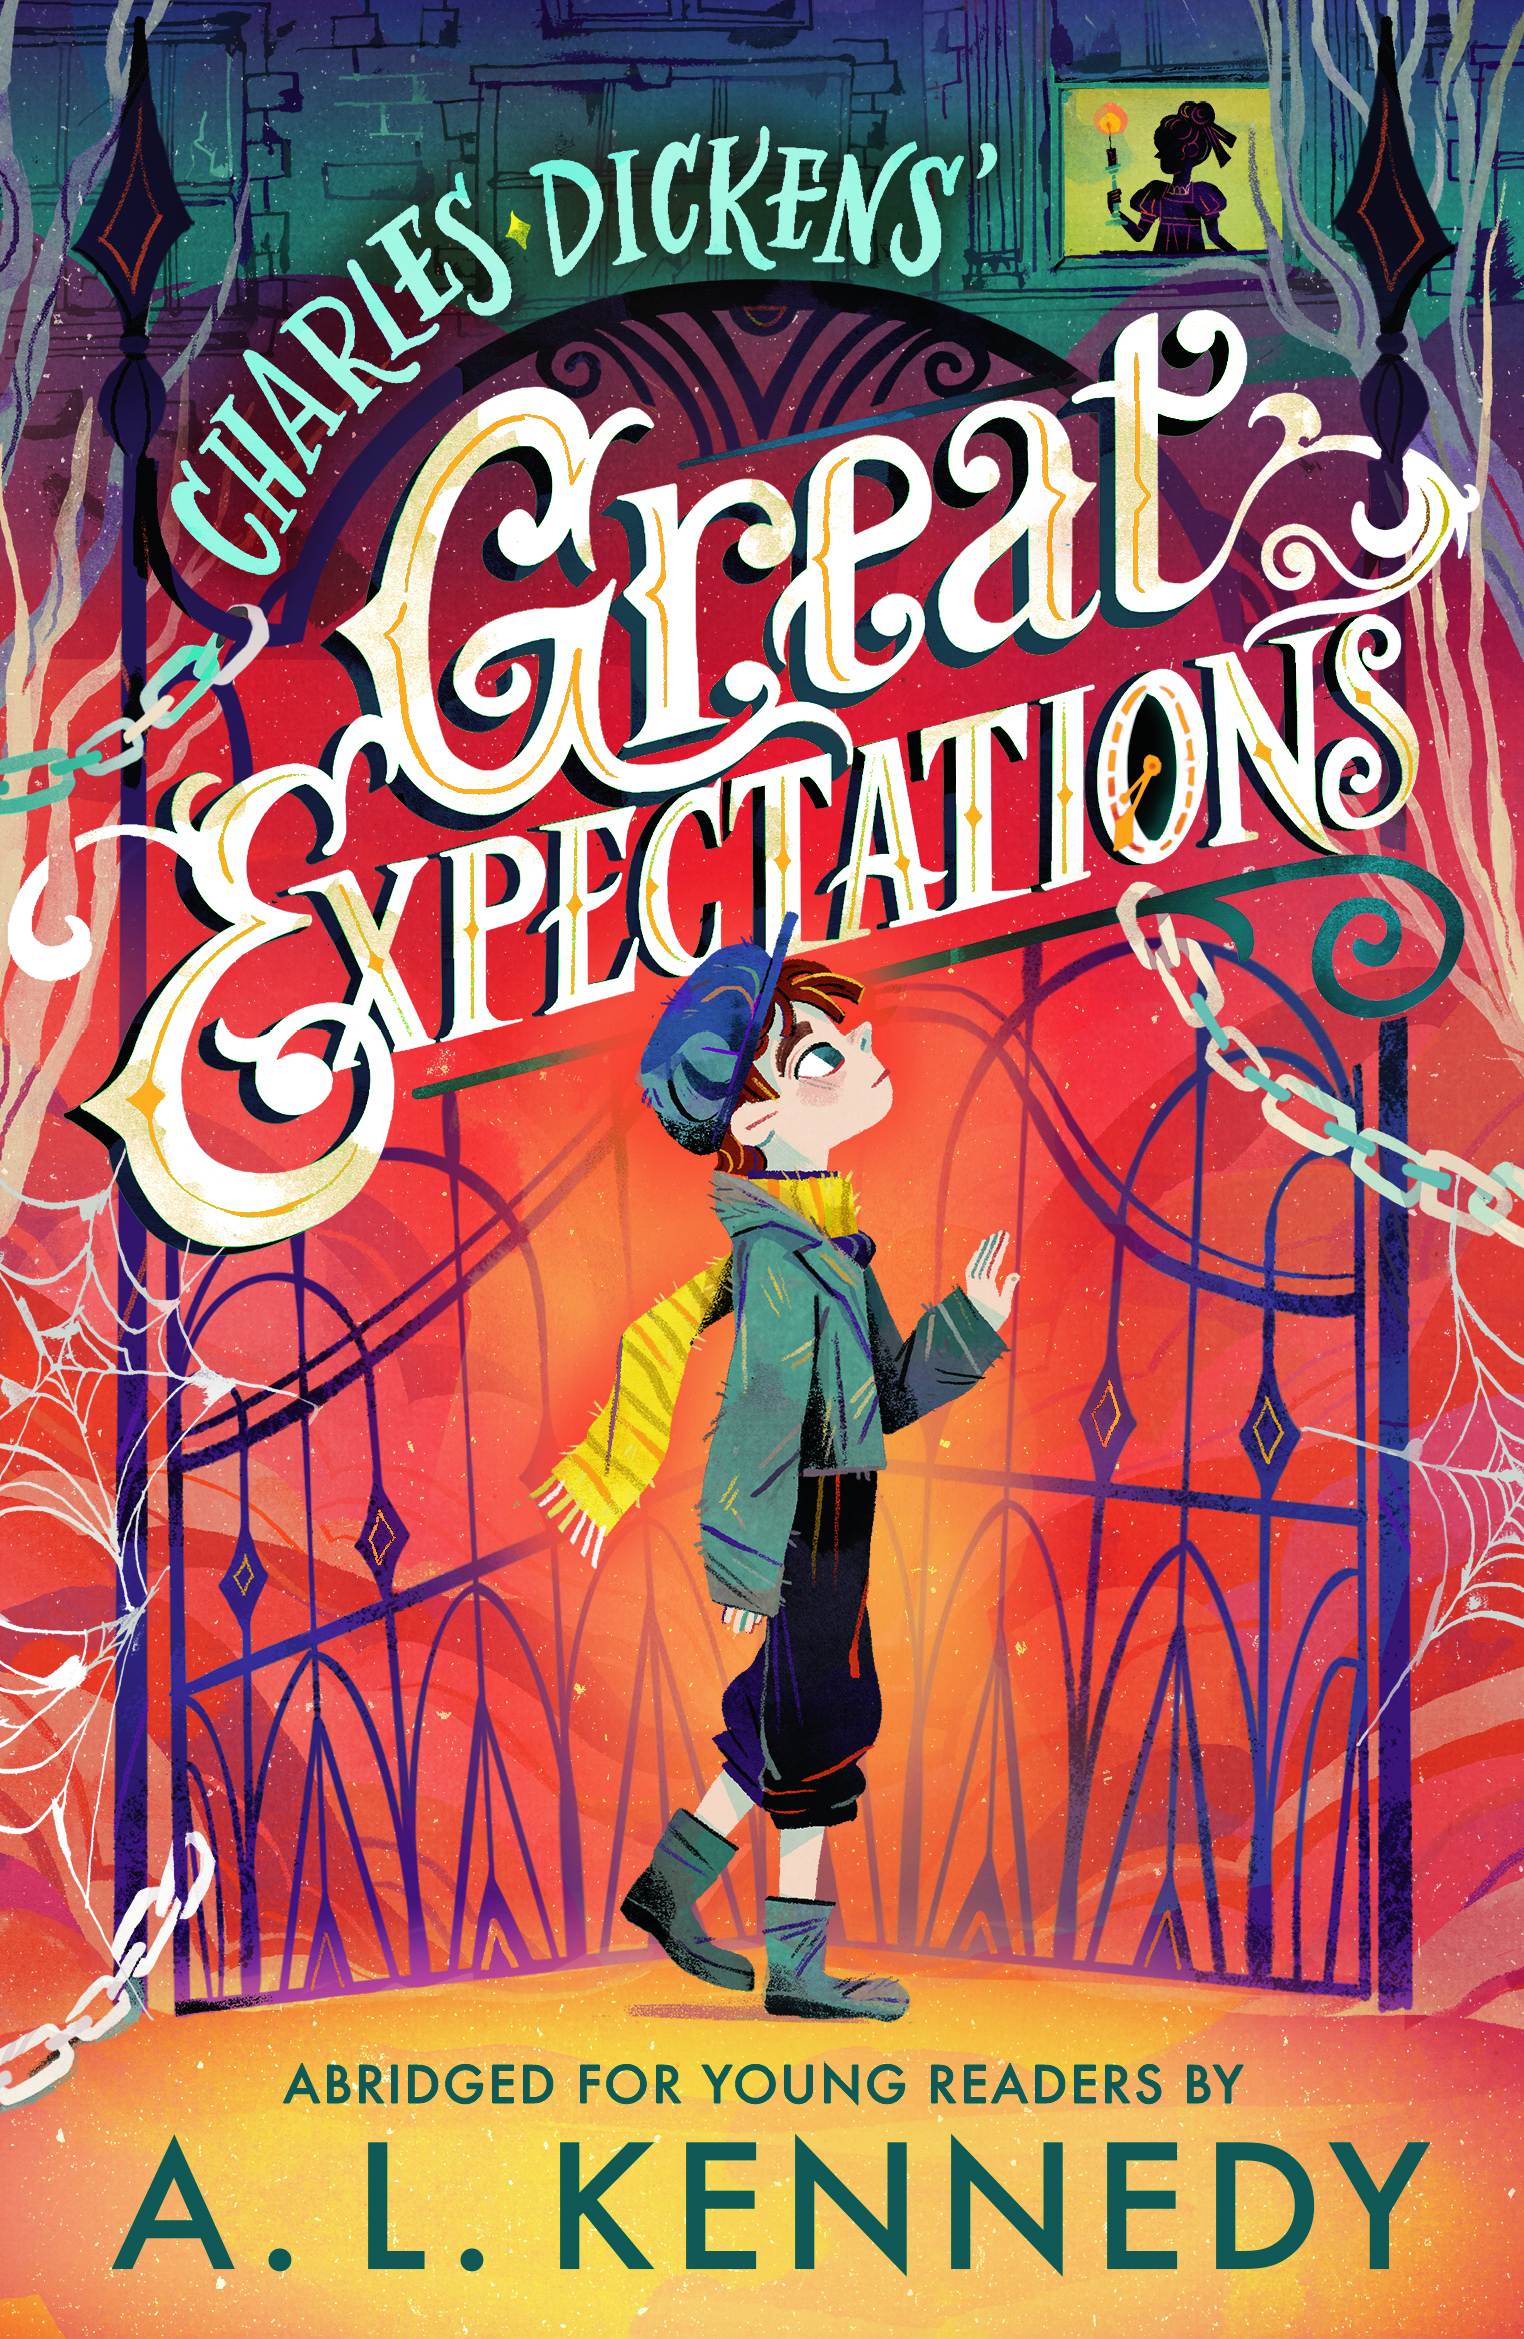 Great-Expectations-Abridged-for-Young-Readers